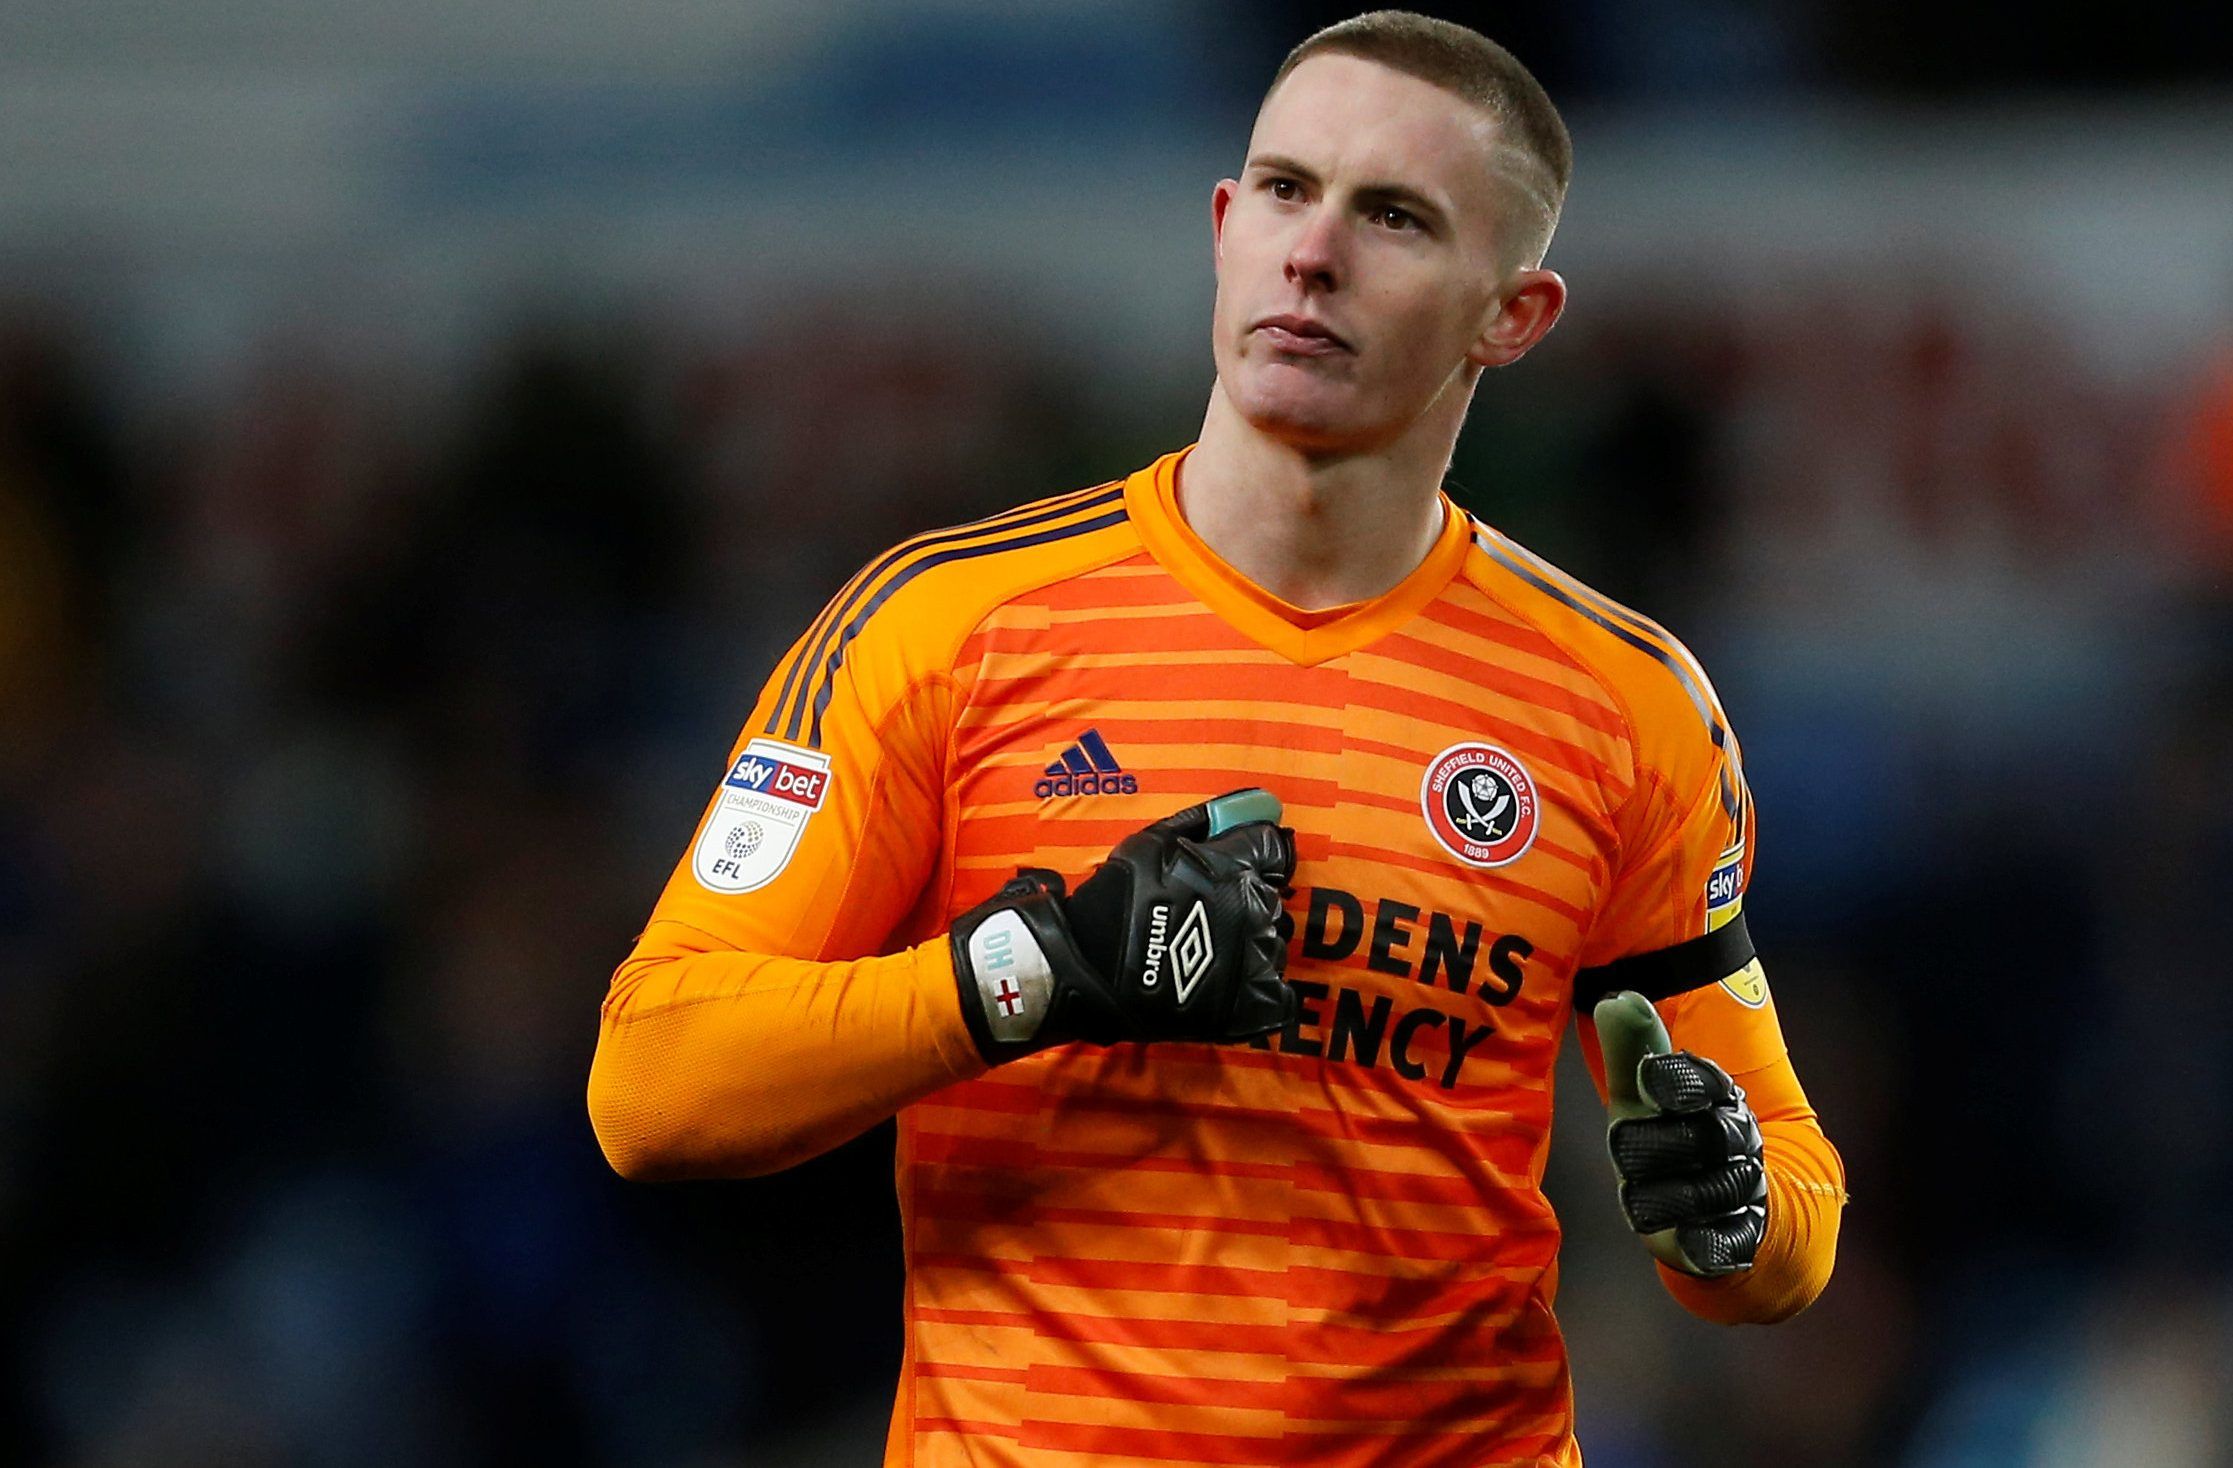 Soccer Football - Championship - Aston Villa v Sheffield United - Villa Park, Birmingham, Britain - February 8, 2019   Sheffield United's Dean Henderson looks dejected after the match   Action Images/Craig Brough    EDITORIAL USE ONLY. No use with unauthorized audio, video, data, fixture lists, club/league logos or 